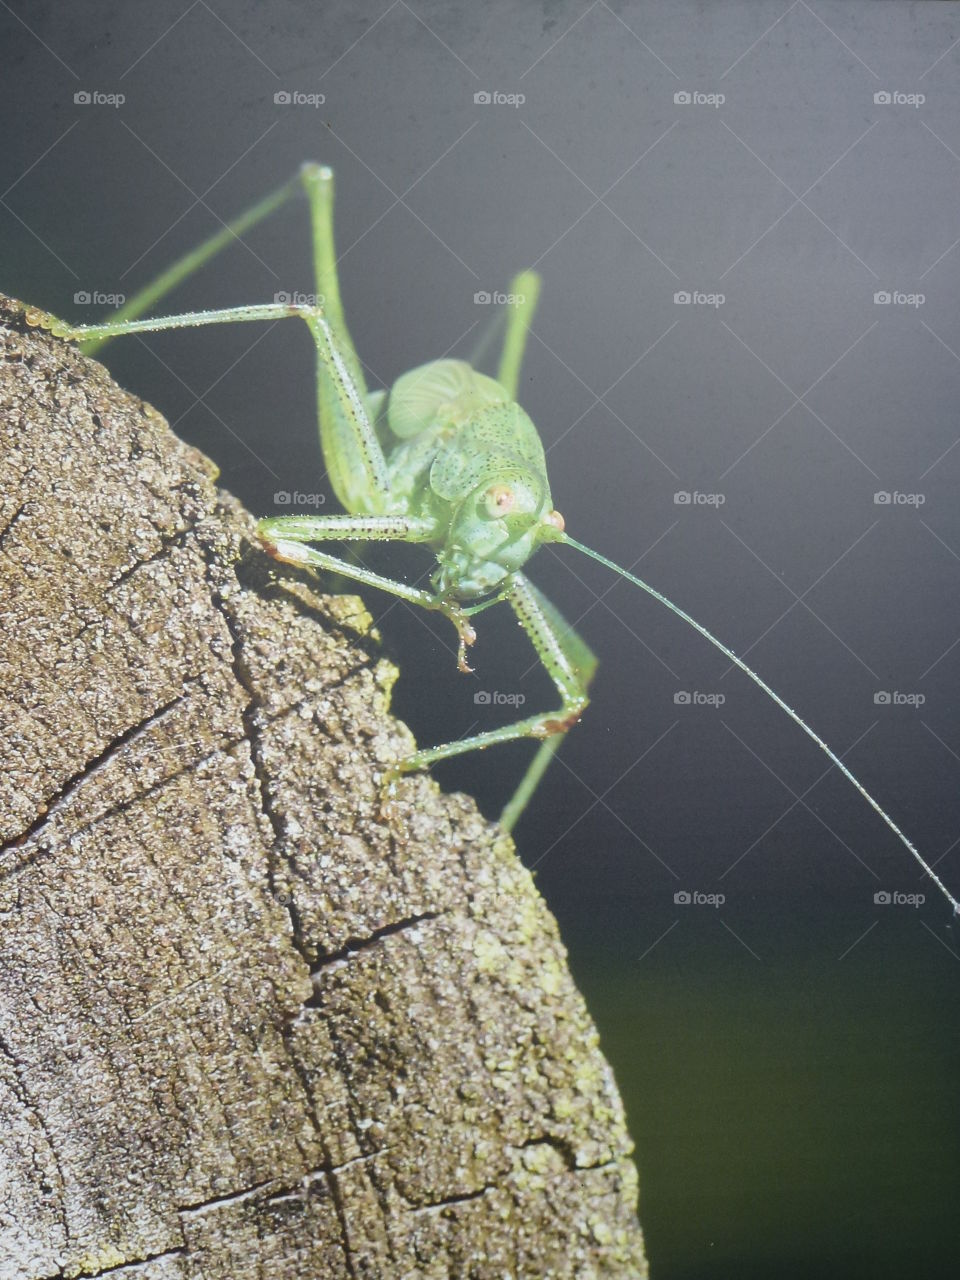 The look of a grasshopper 